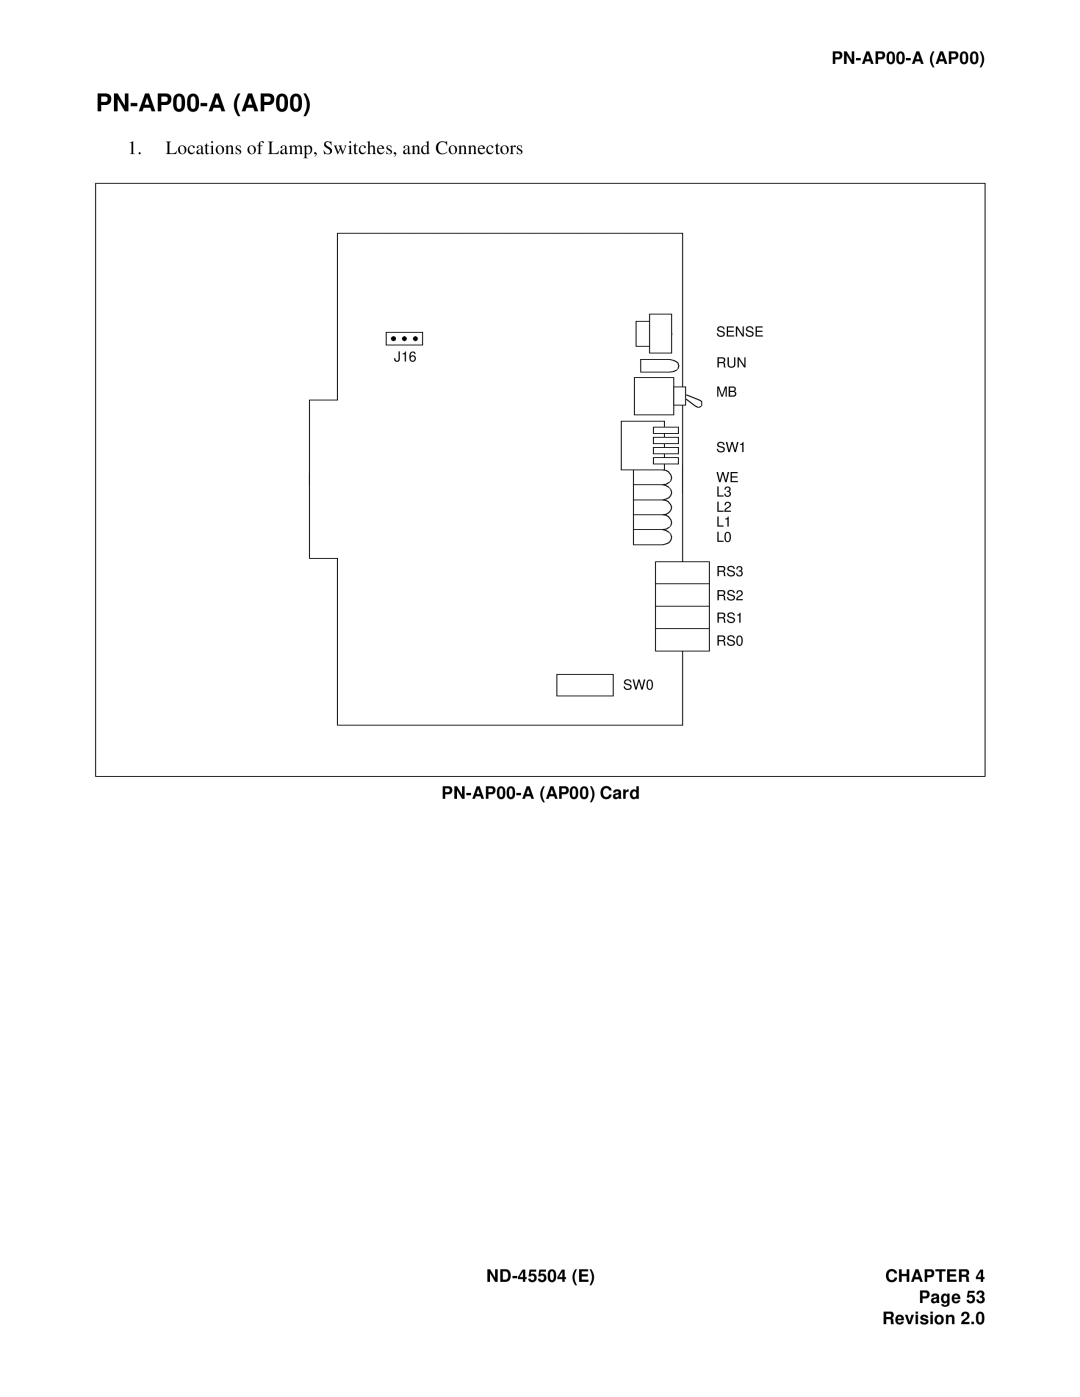 NEC 2000 IVS manual PN-AP00-AAP00, Locations of Lamp, Switches, and Connectors 